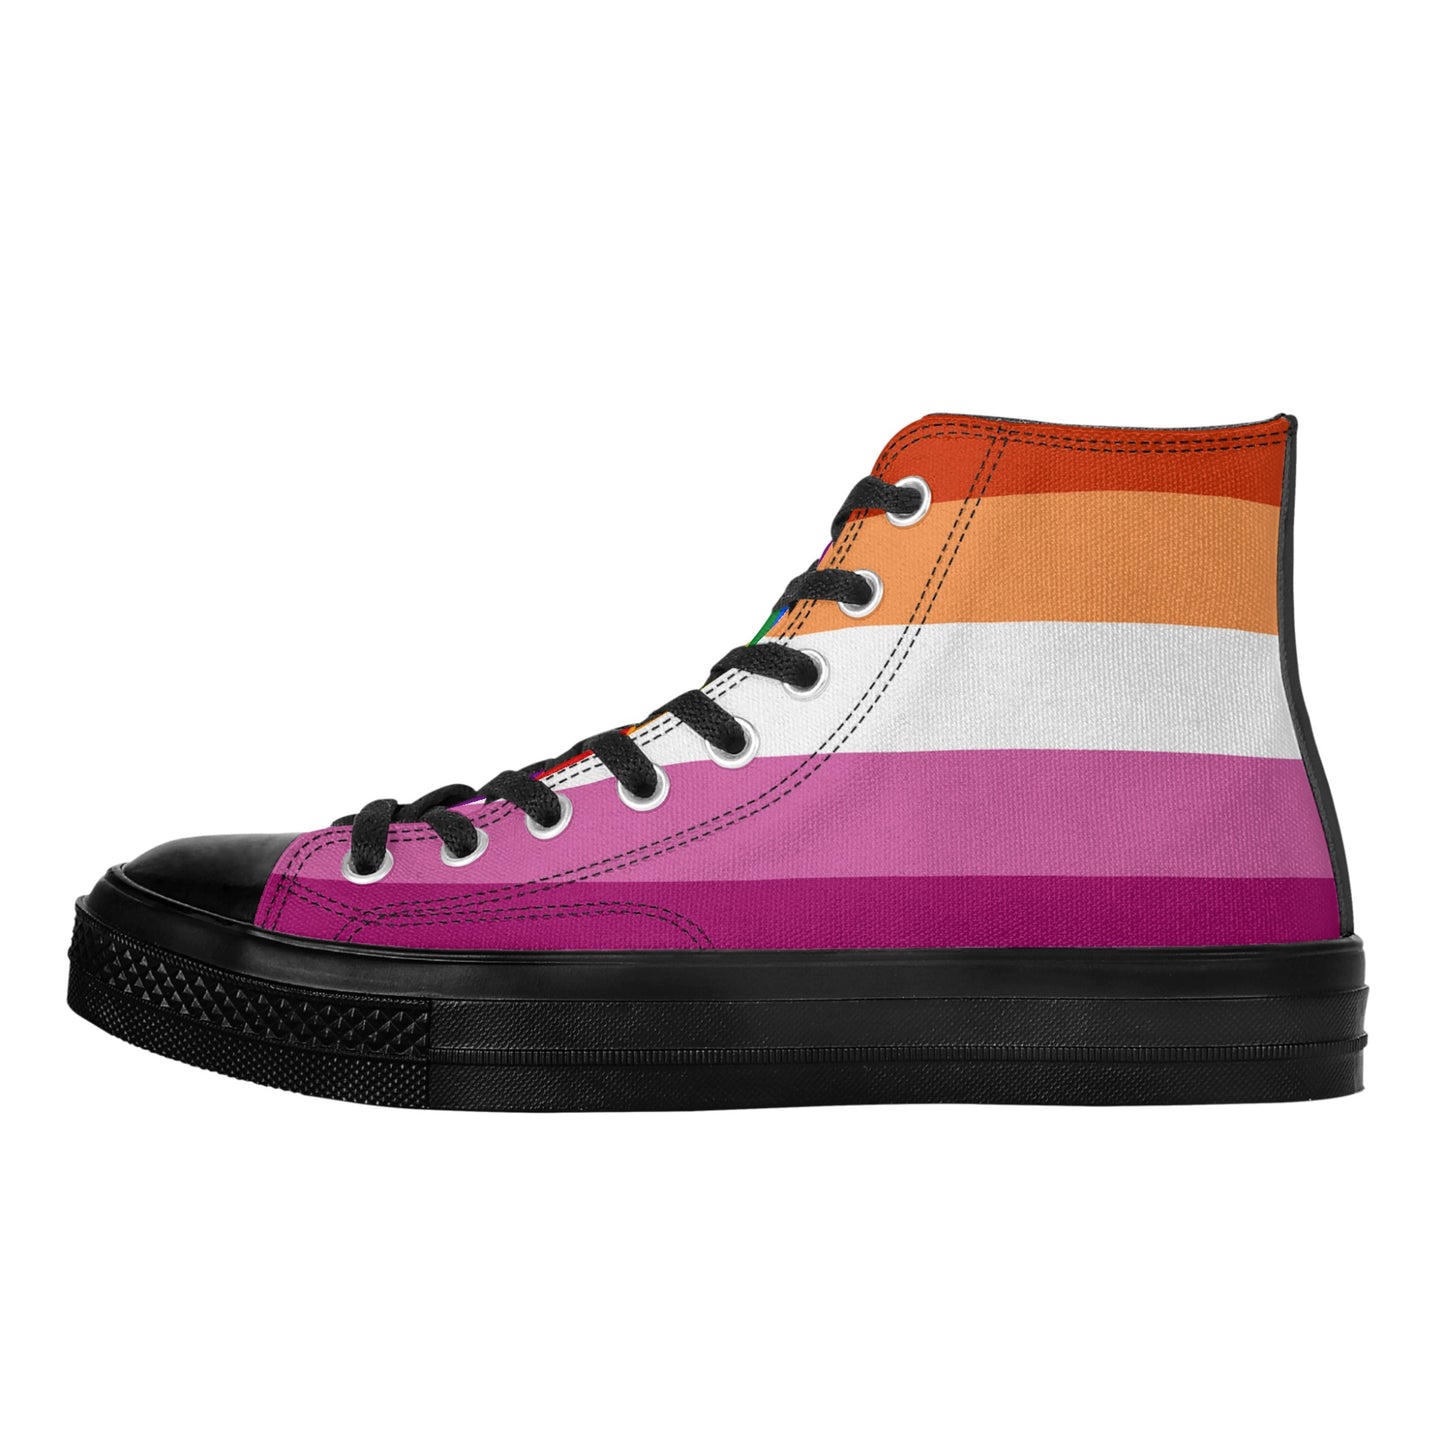 Lesbian Pride Collection - Womens Classic Black High Top Canvas Shoes for the LGBTQIA+ community